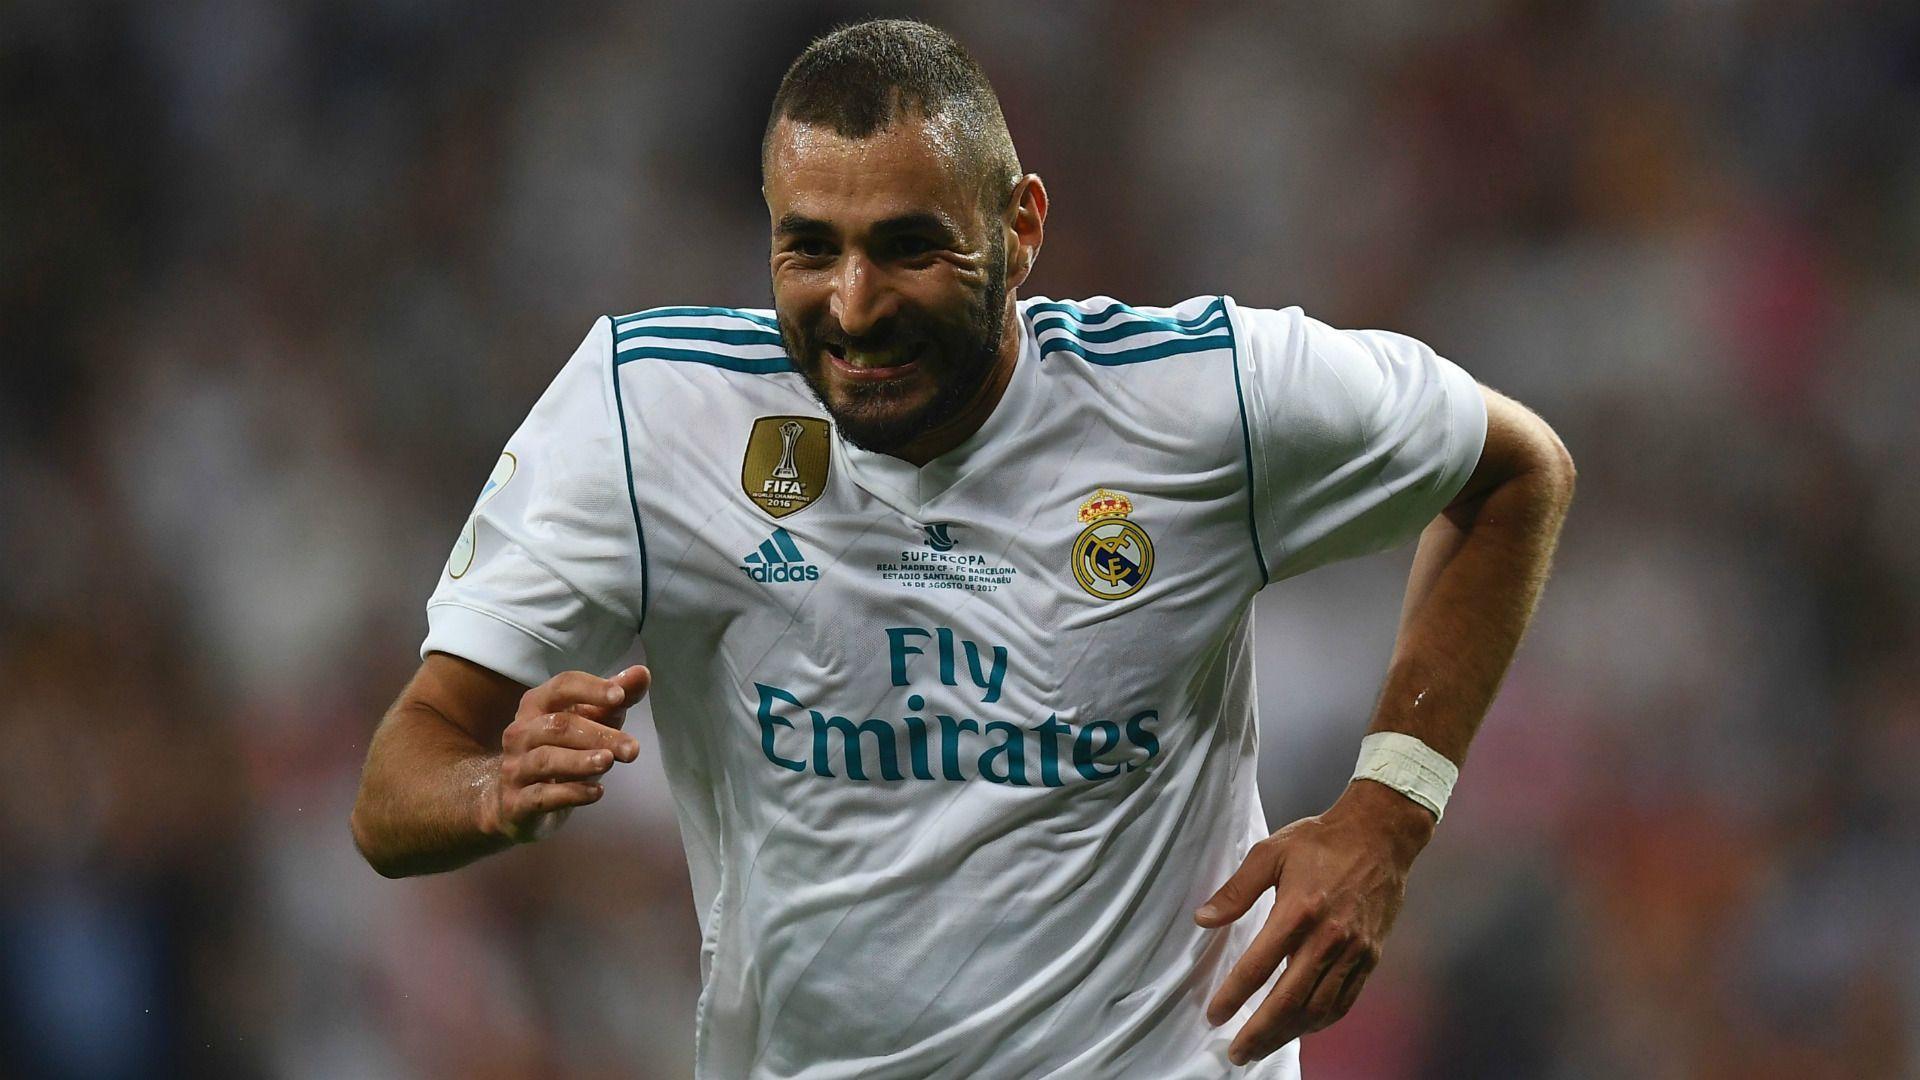 Karim Benzema Latest Full HD Wallpaper And Picture